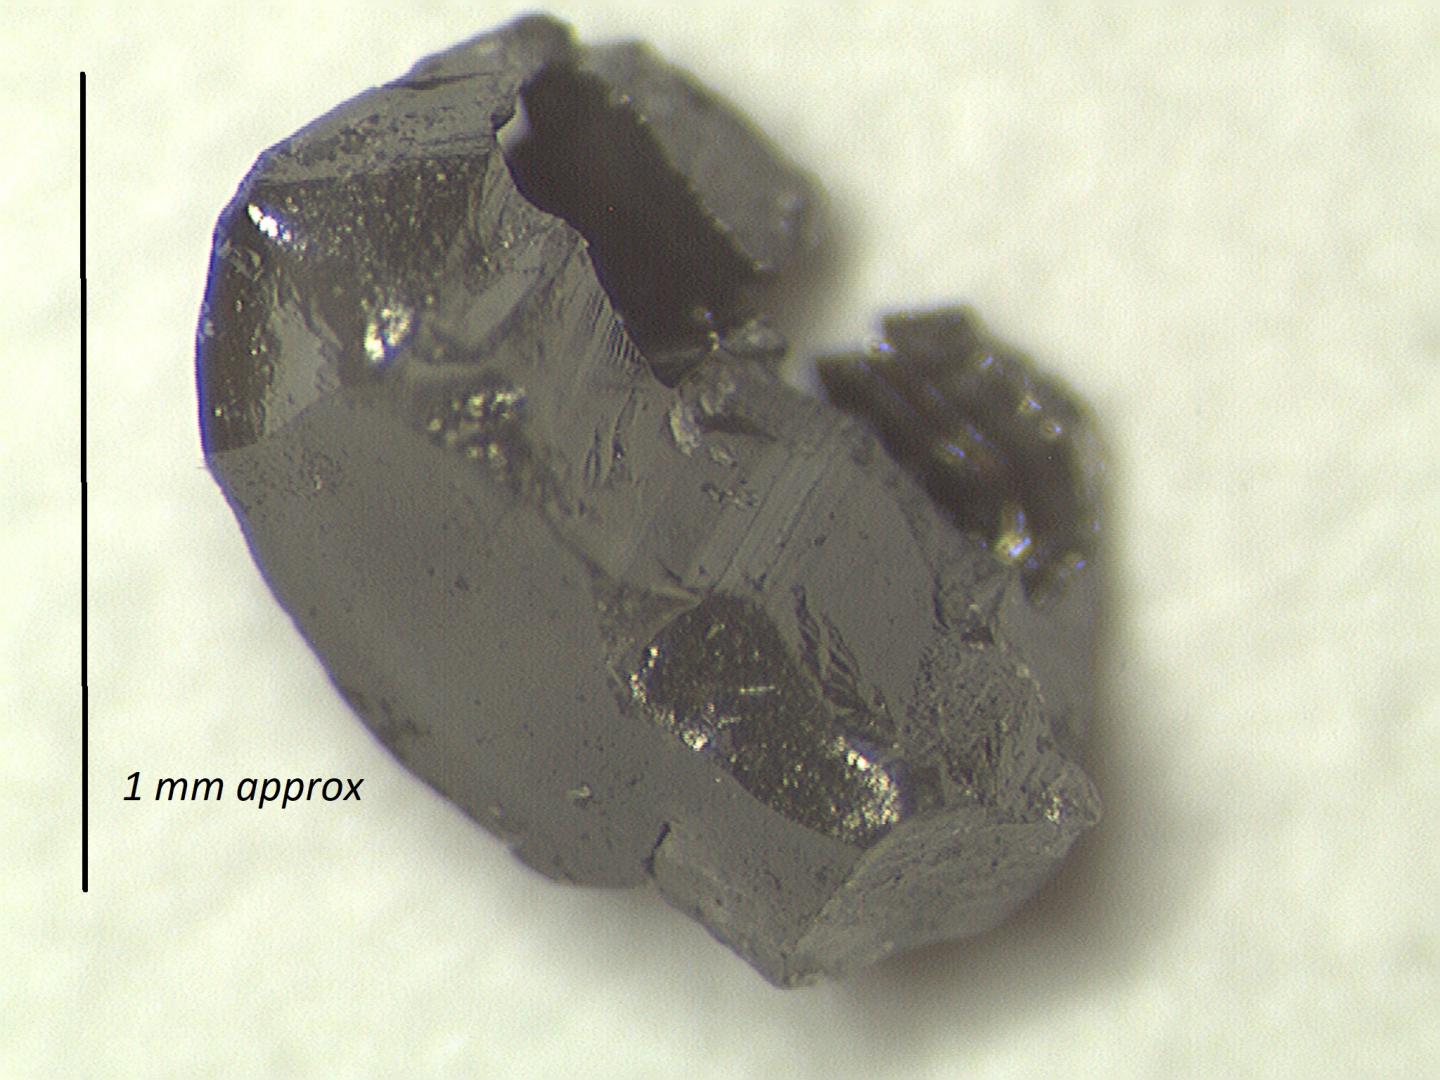 One of the 2.7 billion year-old diamonds used in this work